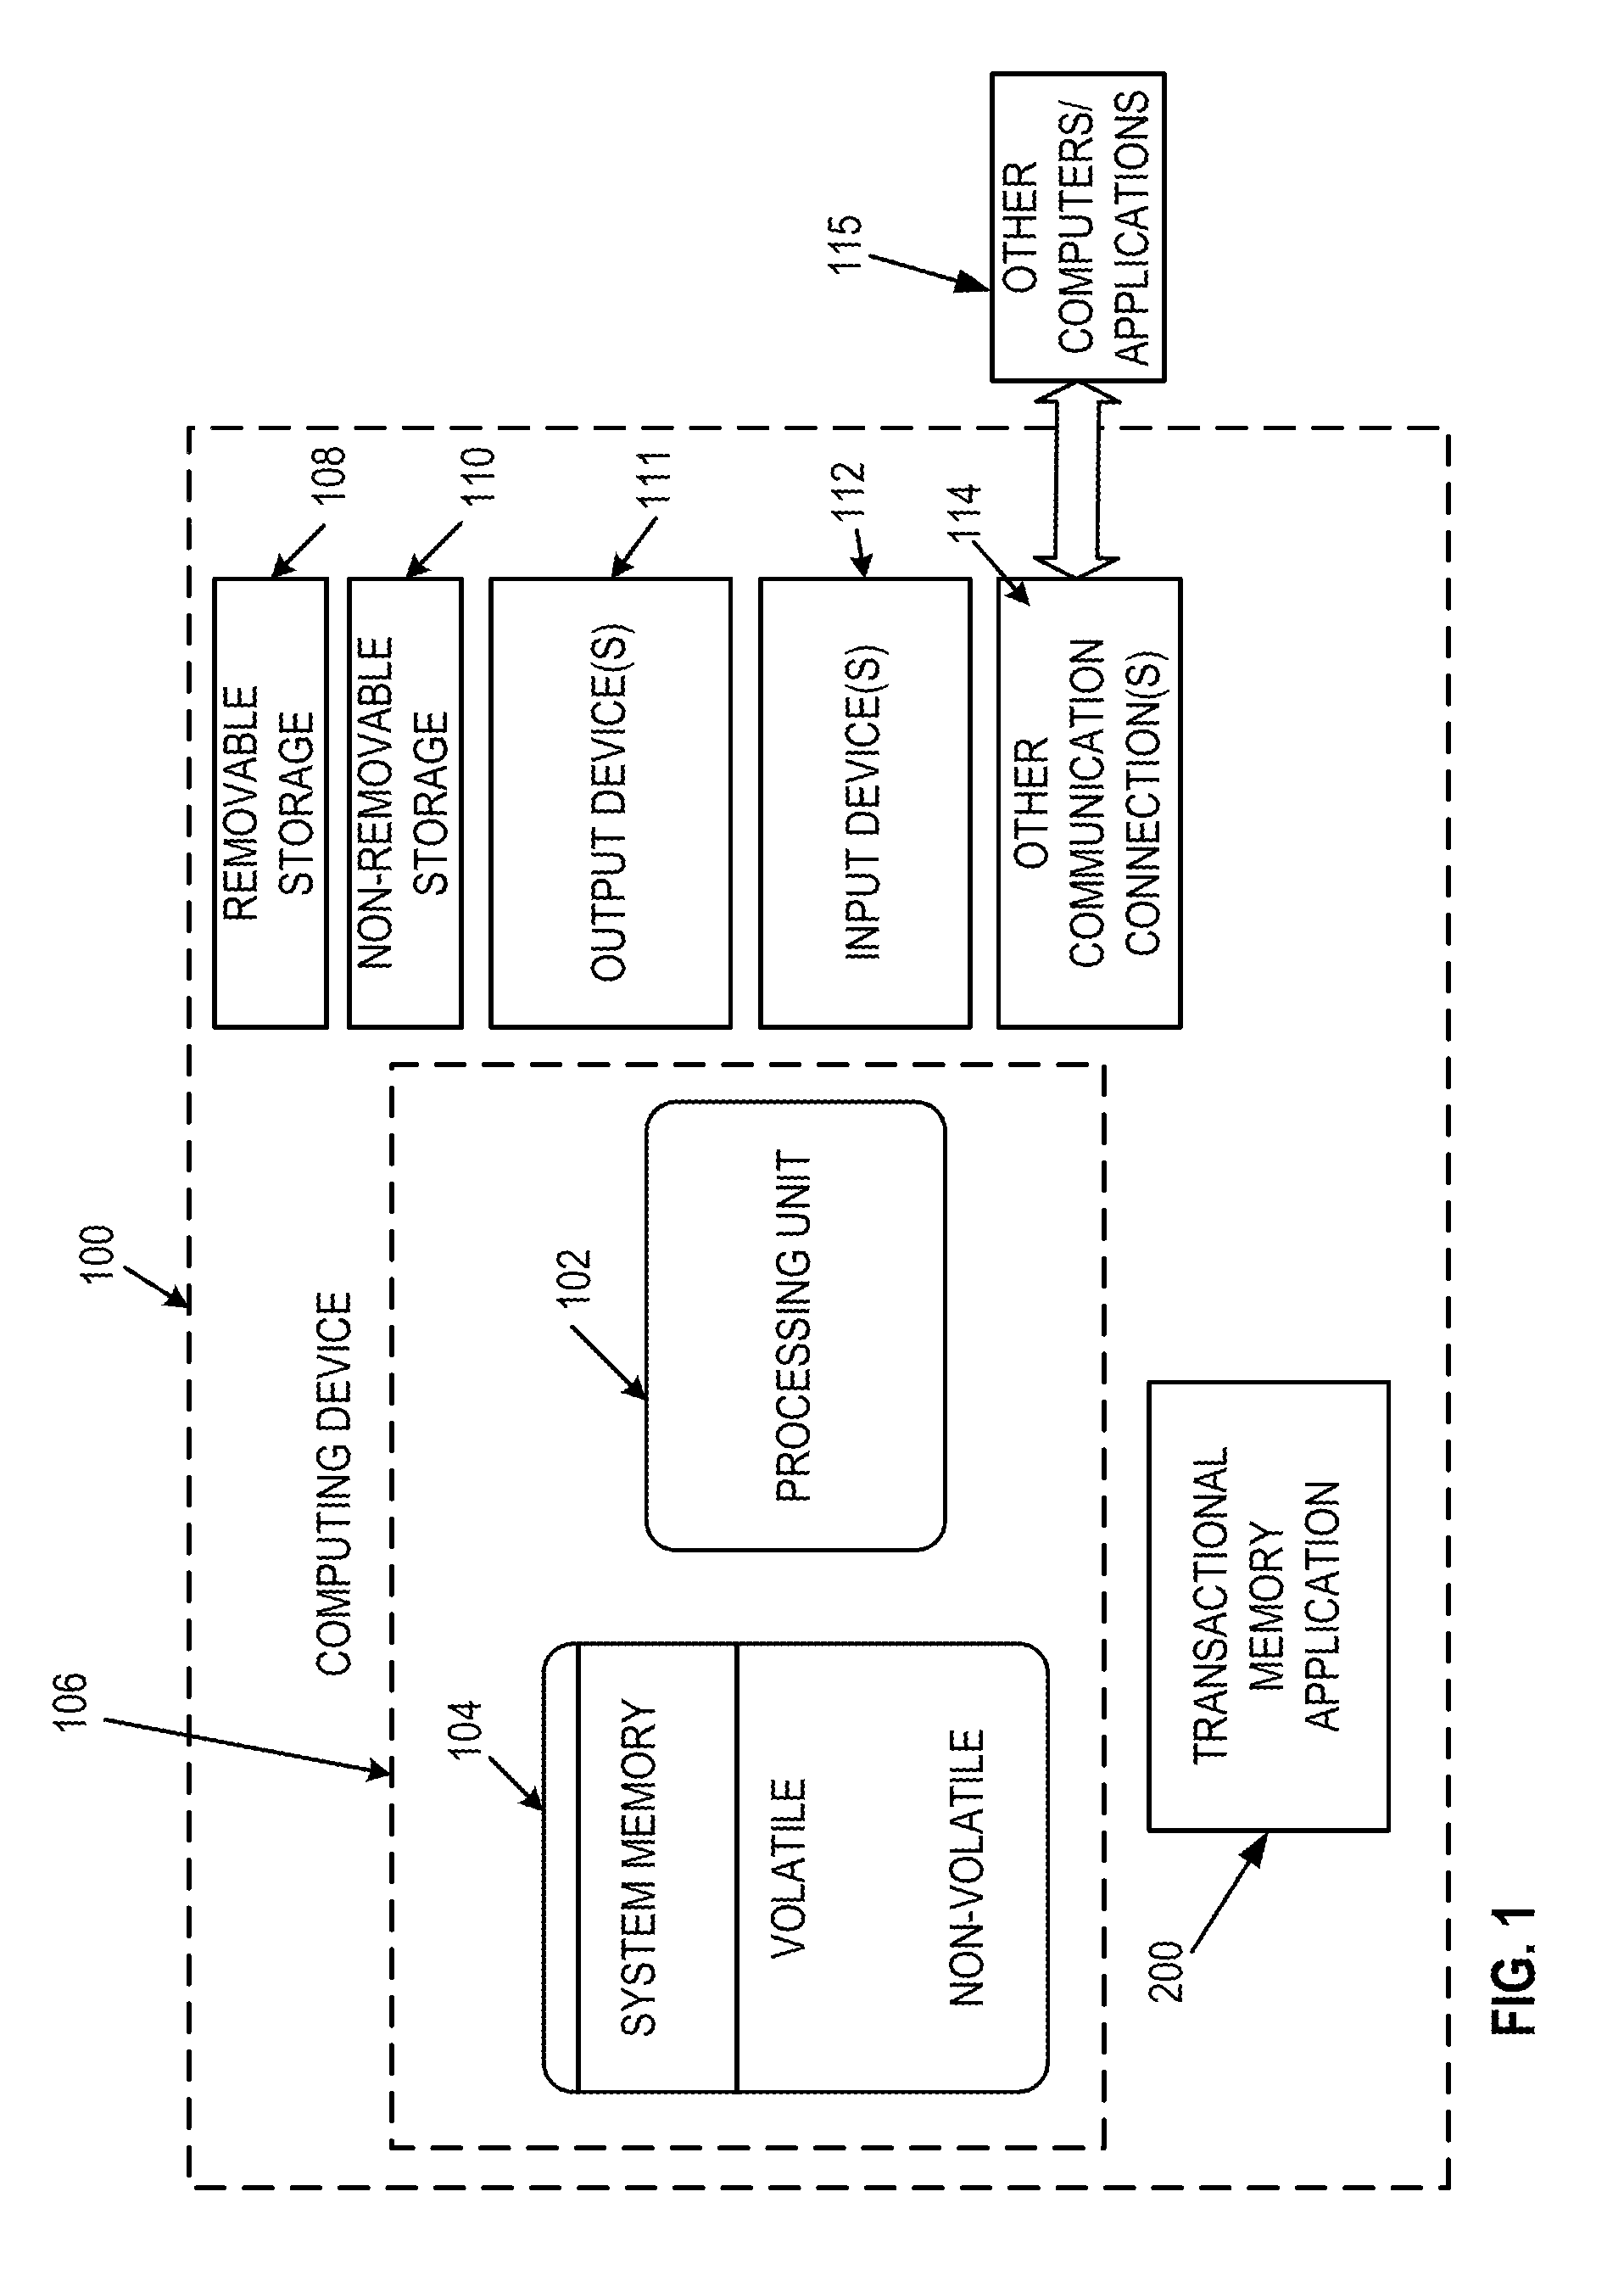 Parallel nested transactions in transactional memory